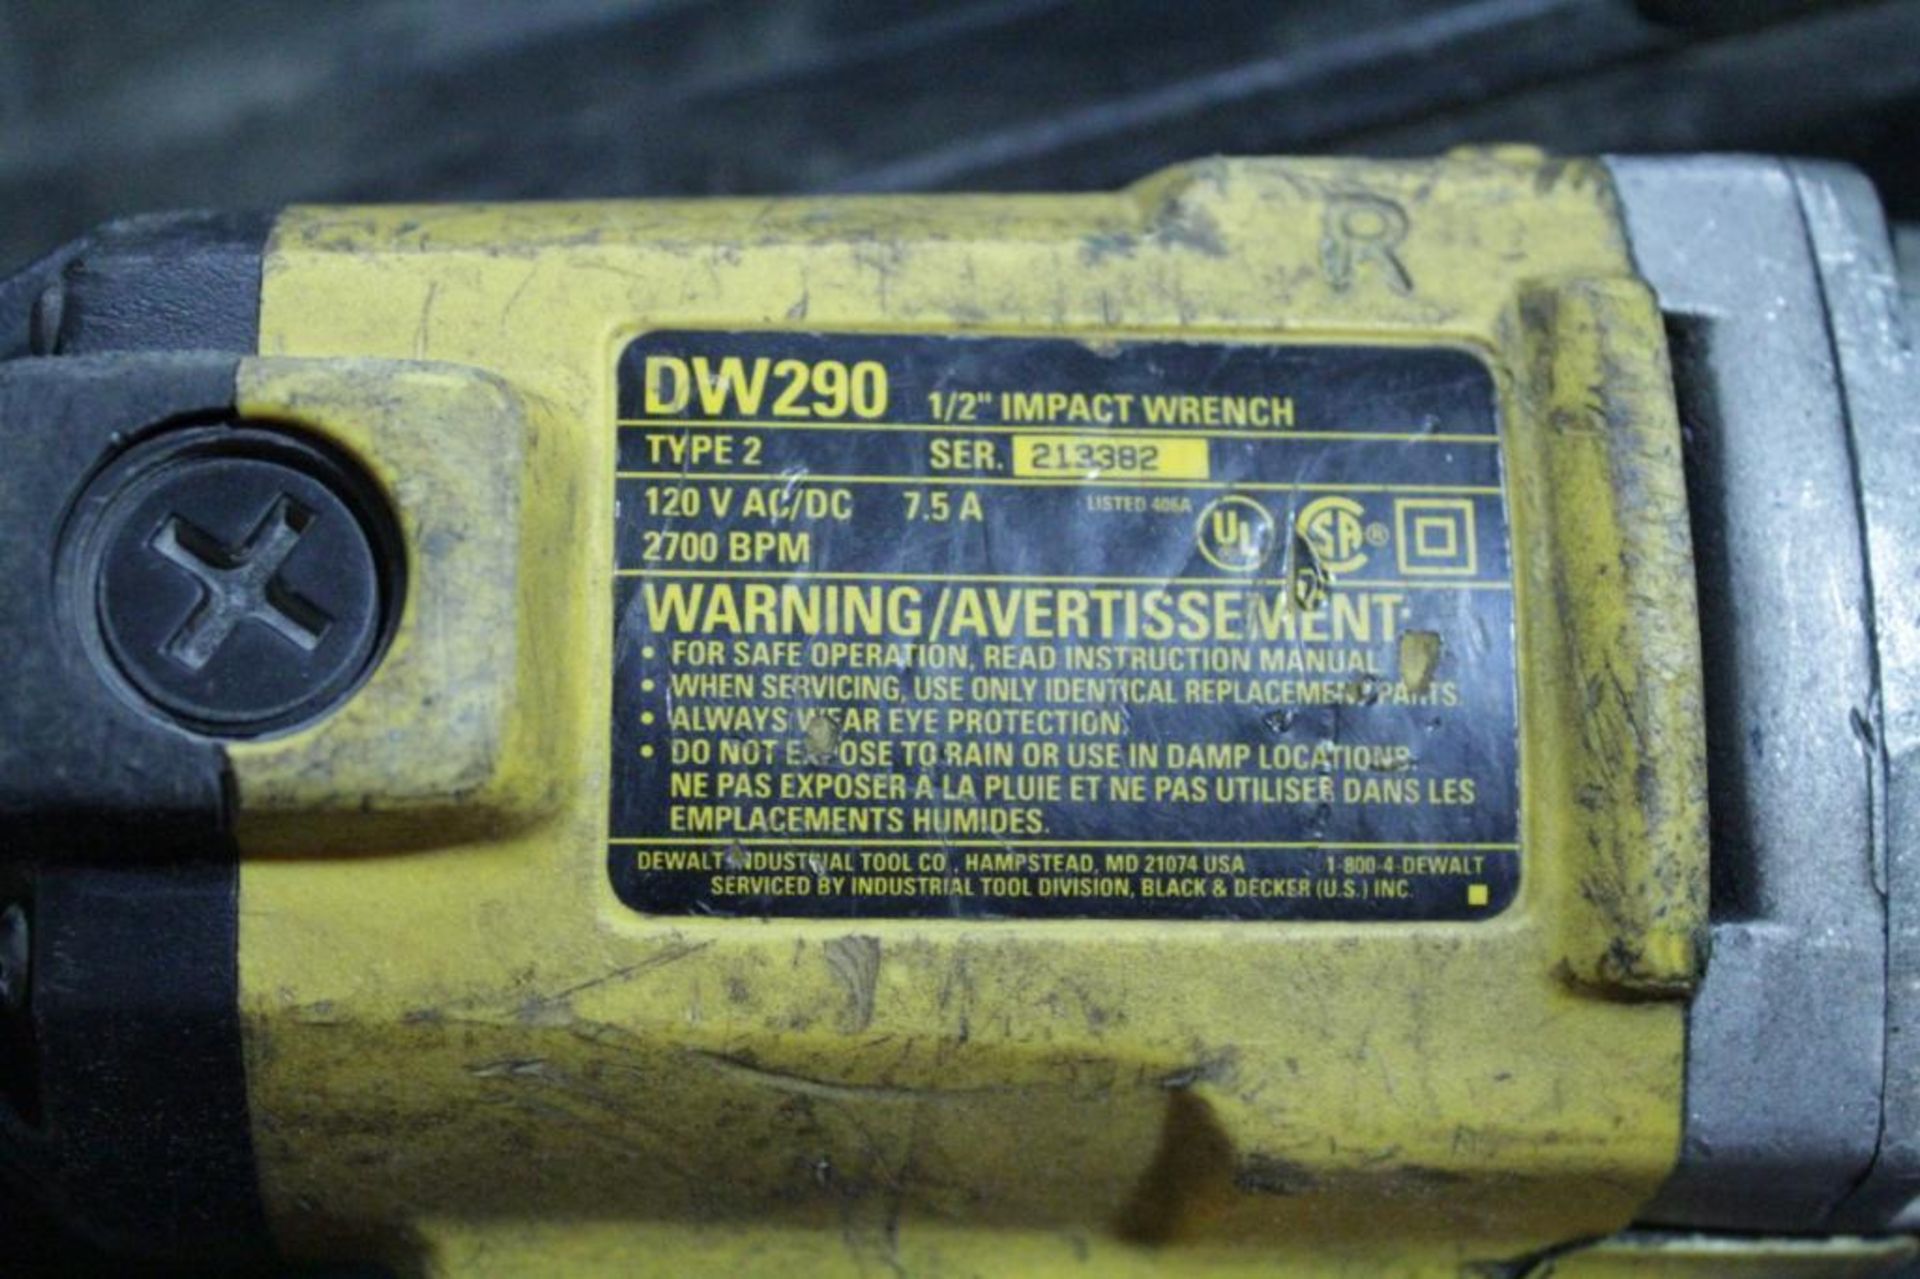 1/2" DeWalt corded impact wrench - Image 2 of 2